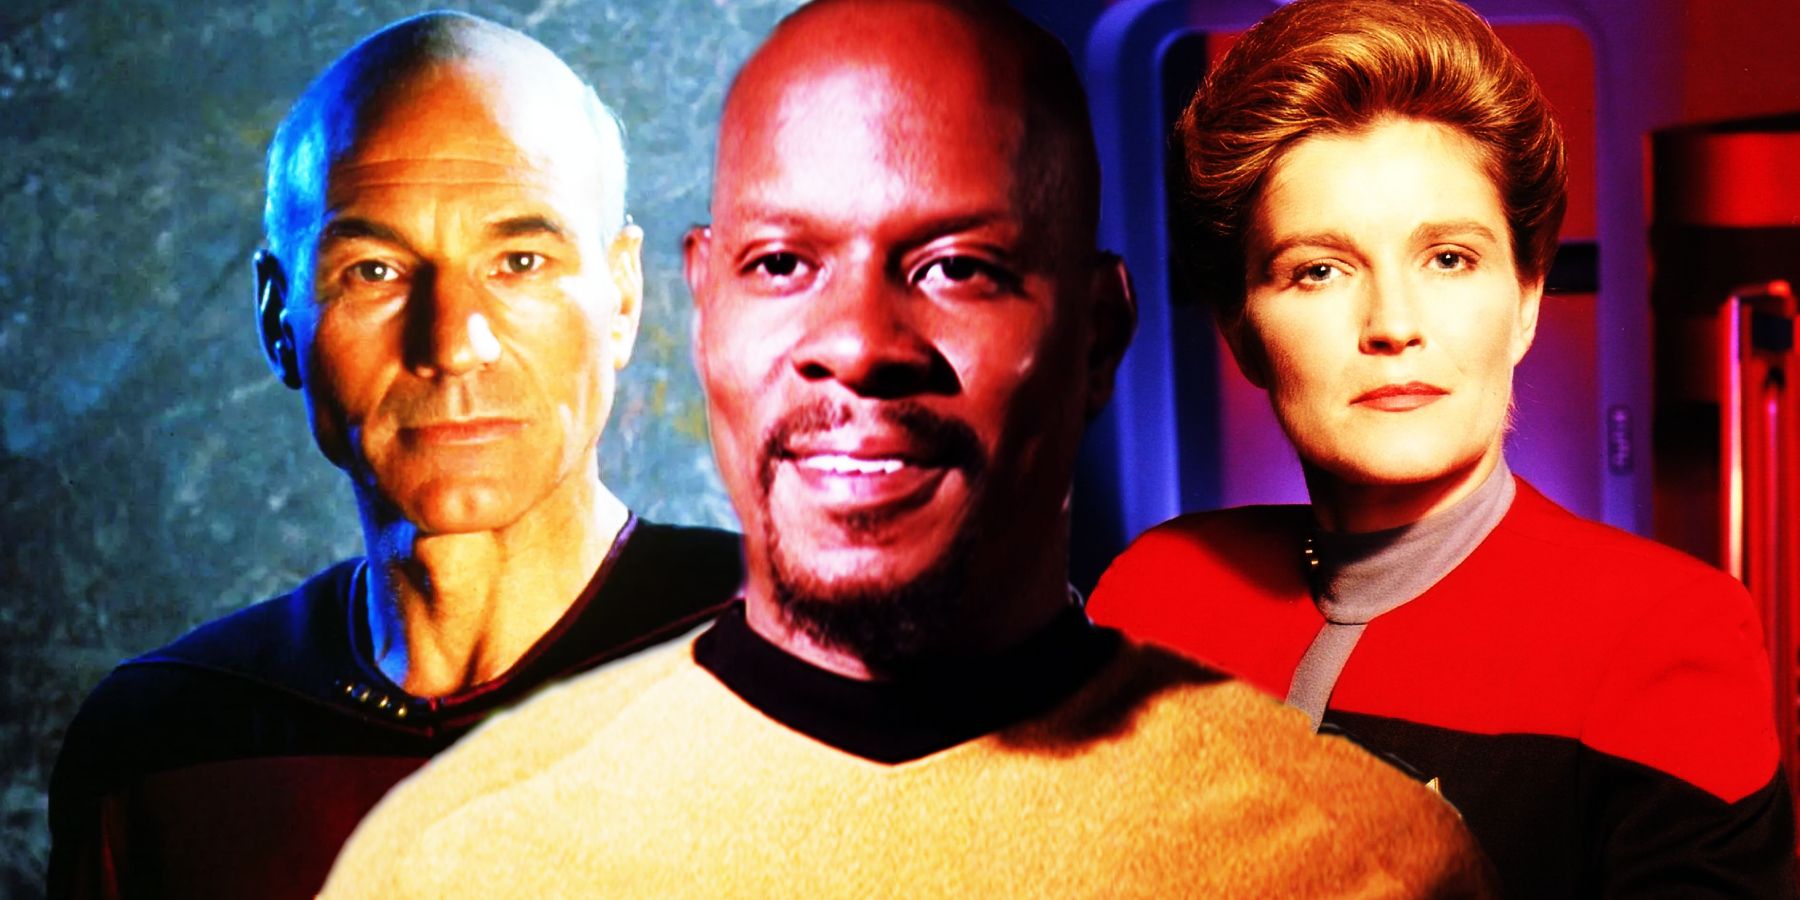 Sisko in TOS uniform in front of Picard and Janeway